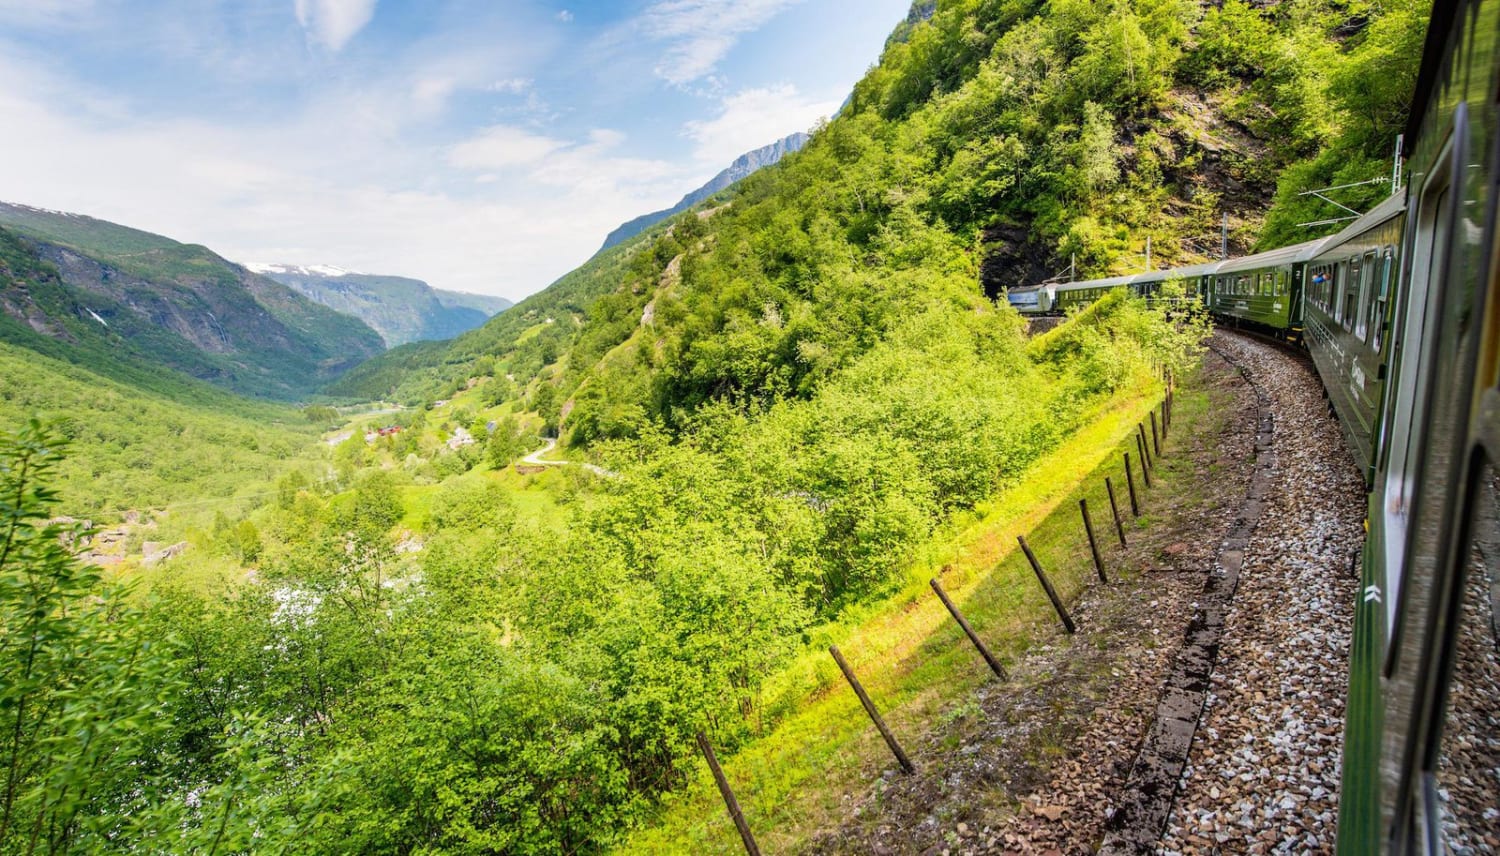 Escape With a Virtual Ride on the World’s Steepest Train